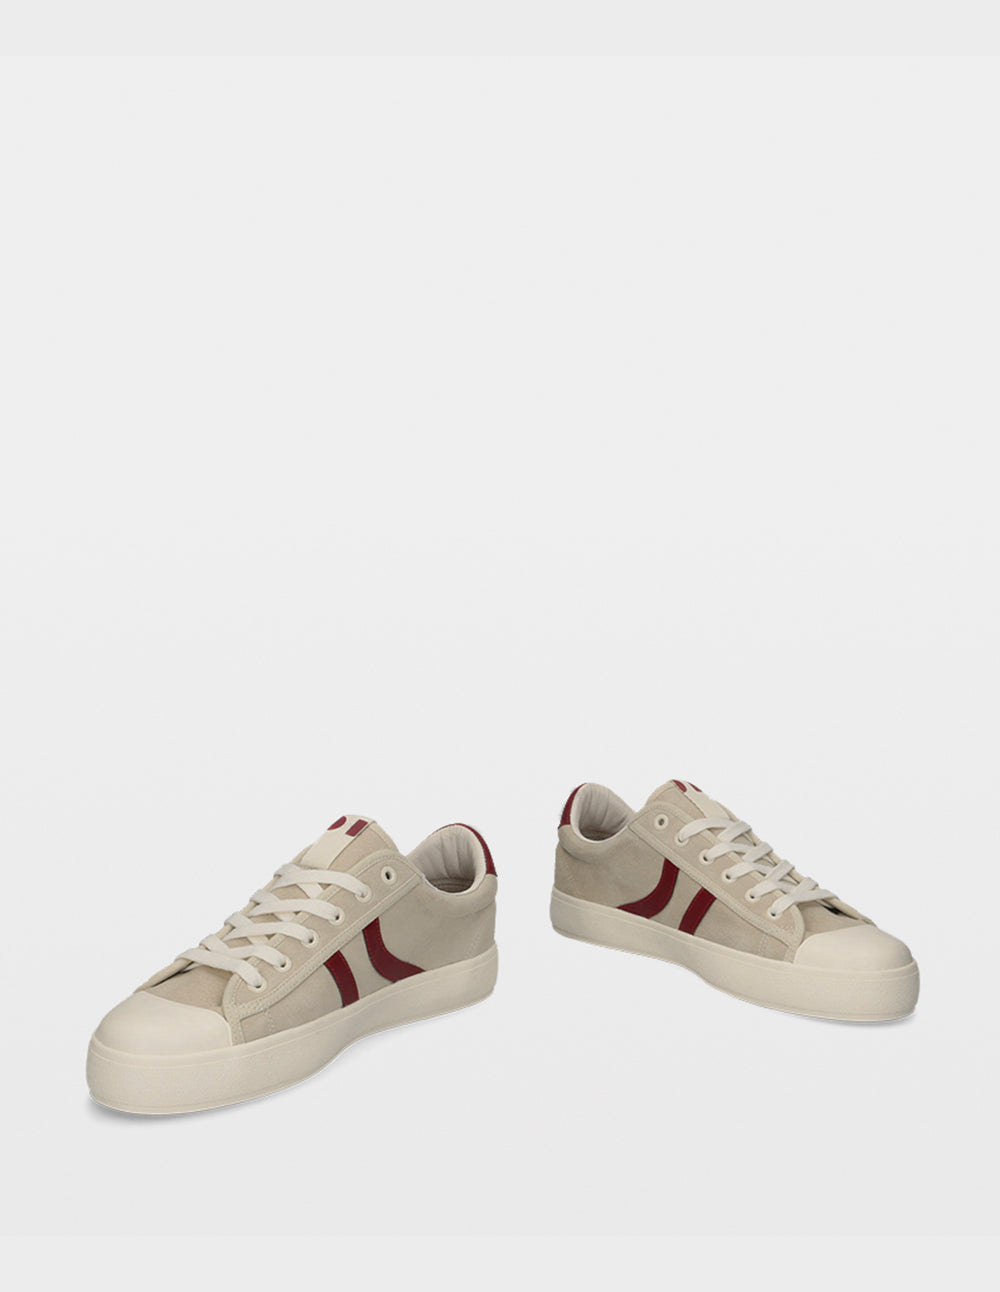 ICON-ONE BEIGE/BURGUNDY LEATHER MUJER